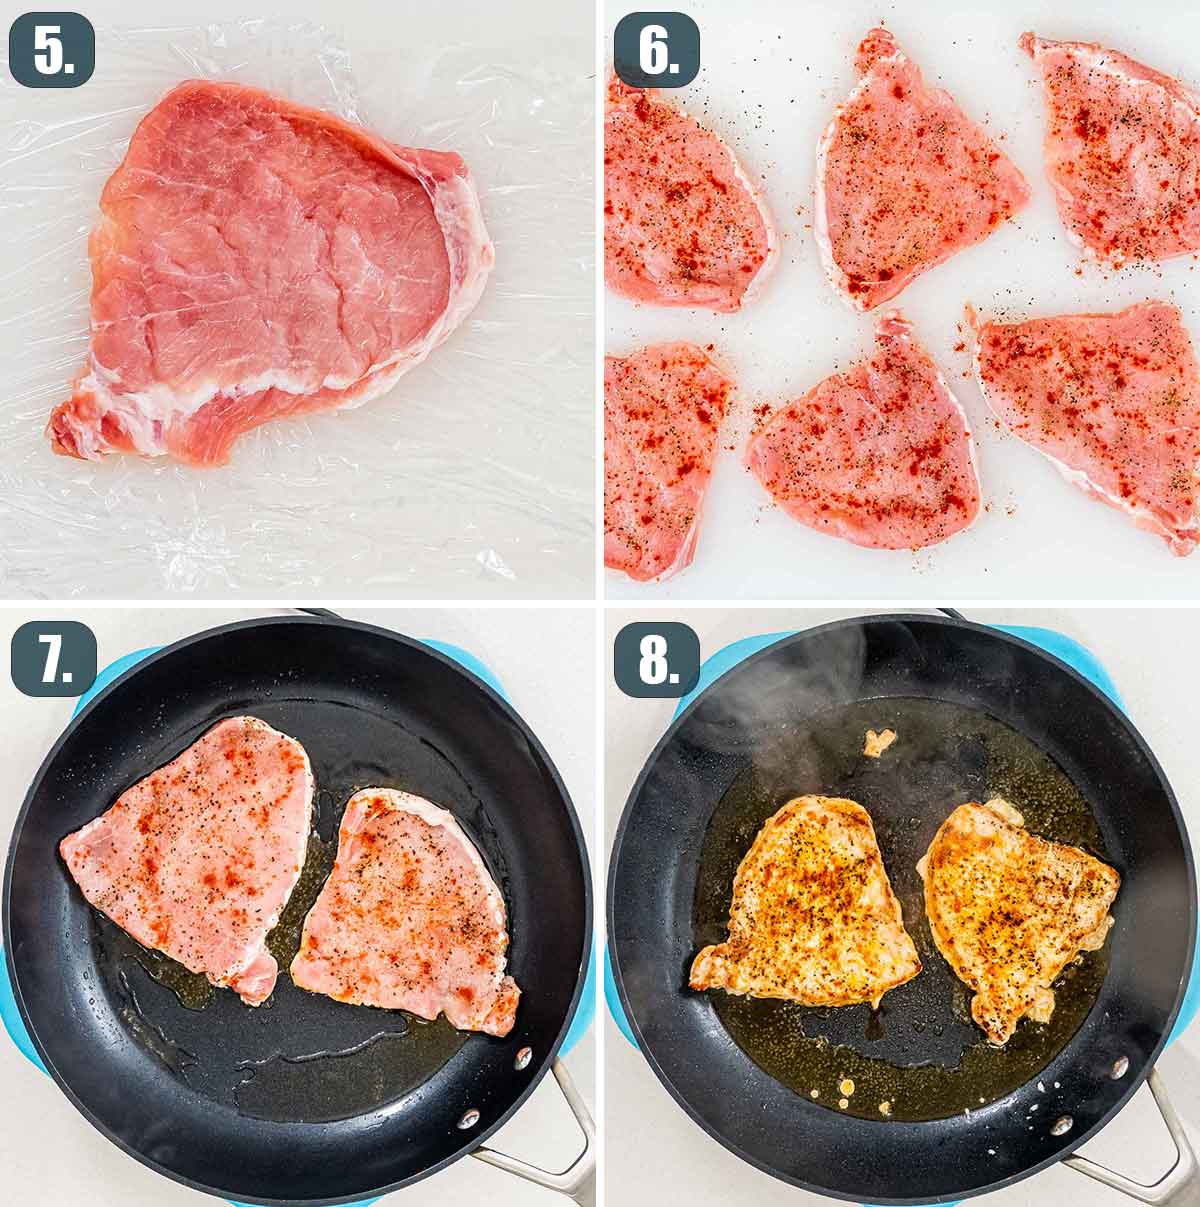 process shots showing how to prep pork chops to make jagerschnitzel.